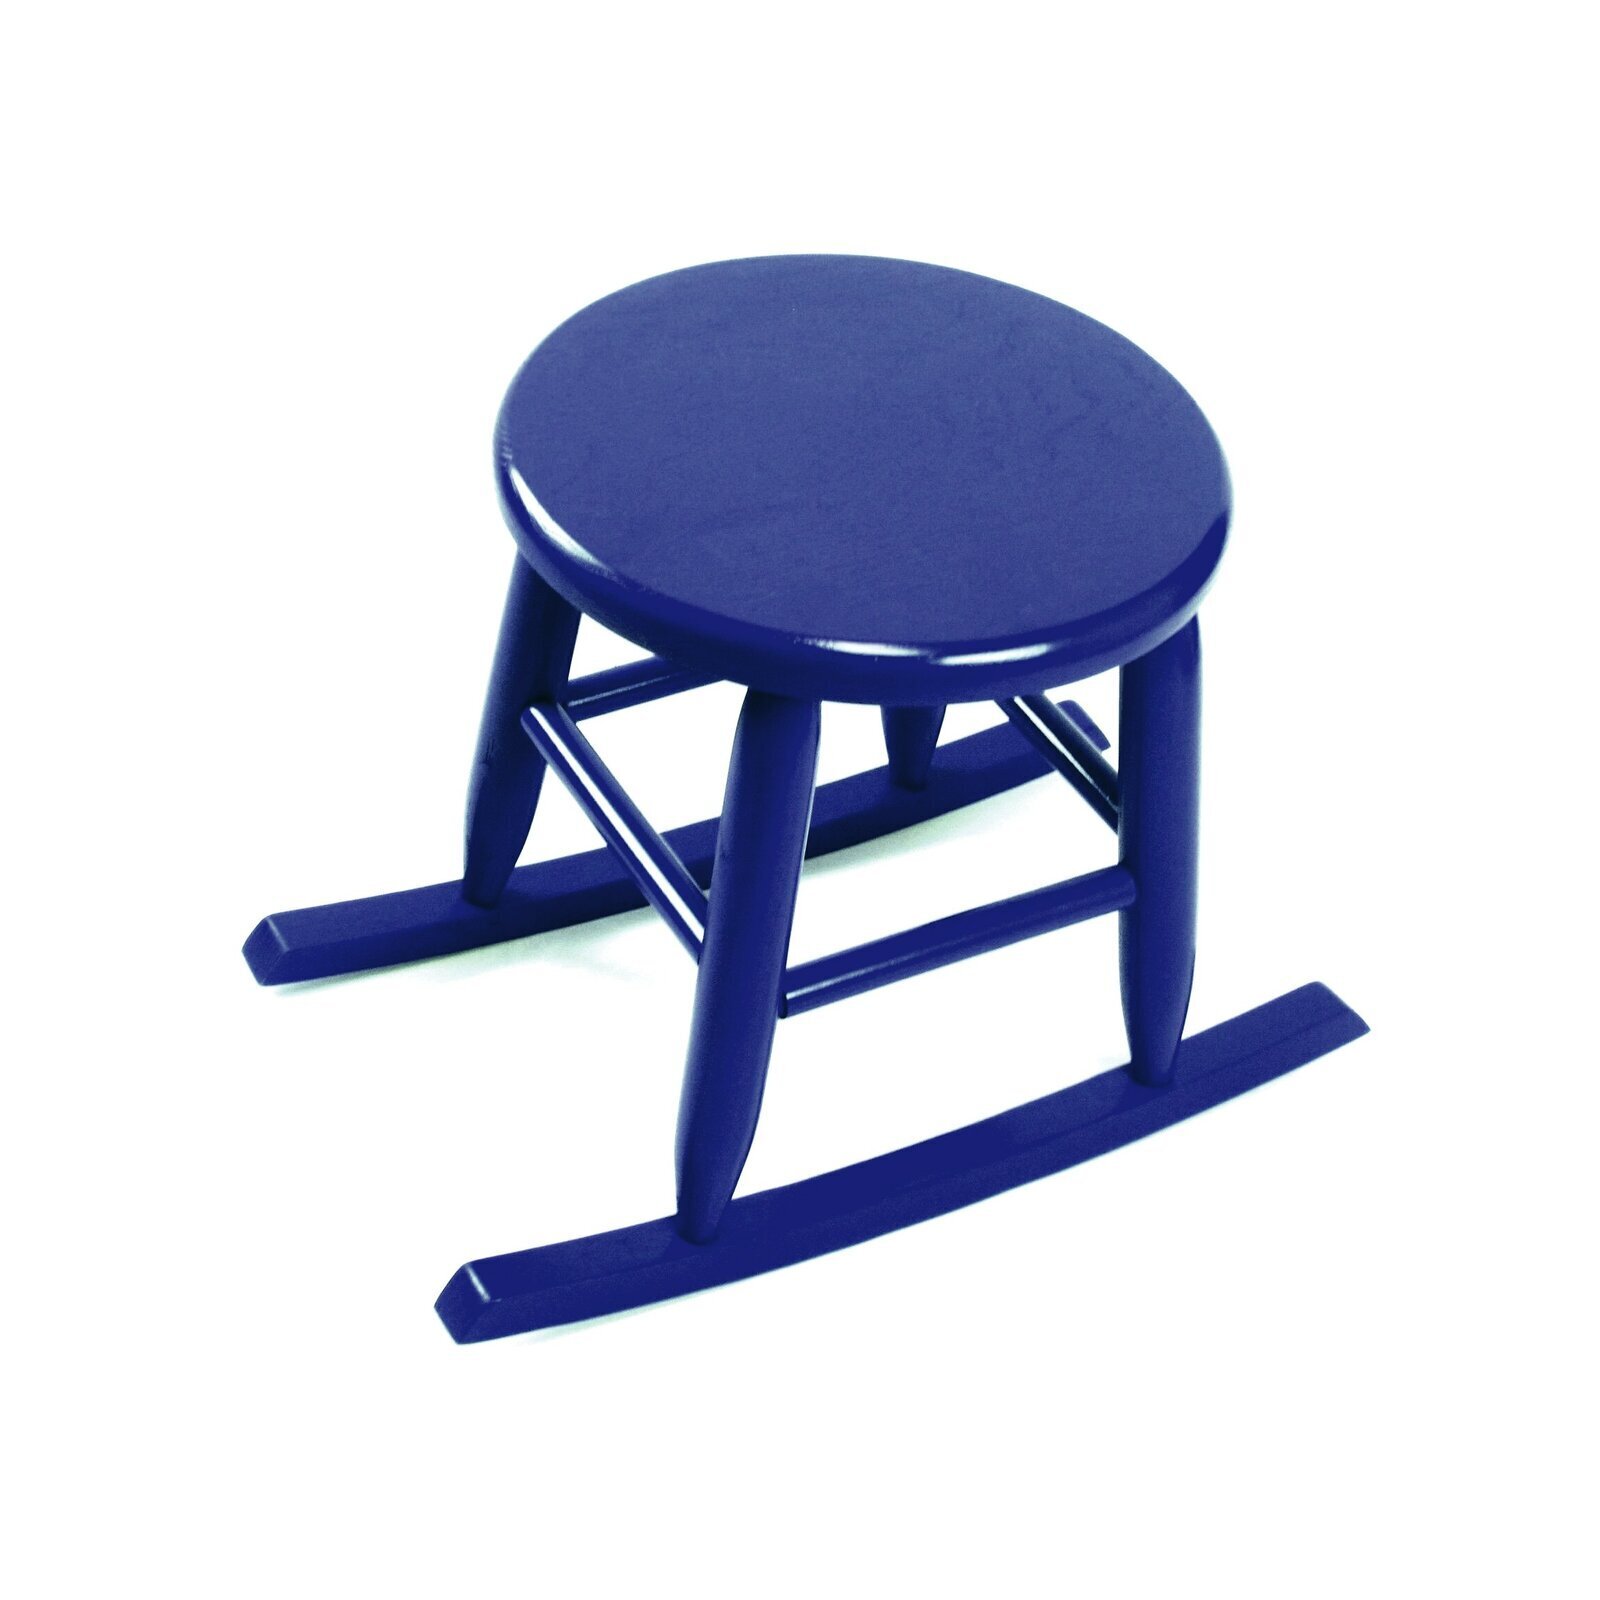 Small Wood Stool With Rocking Motion